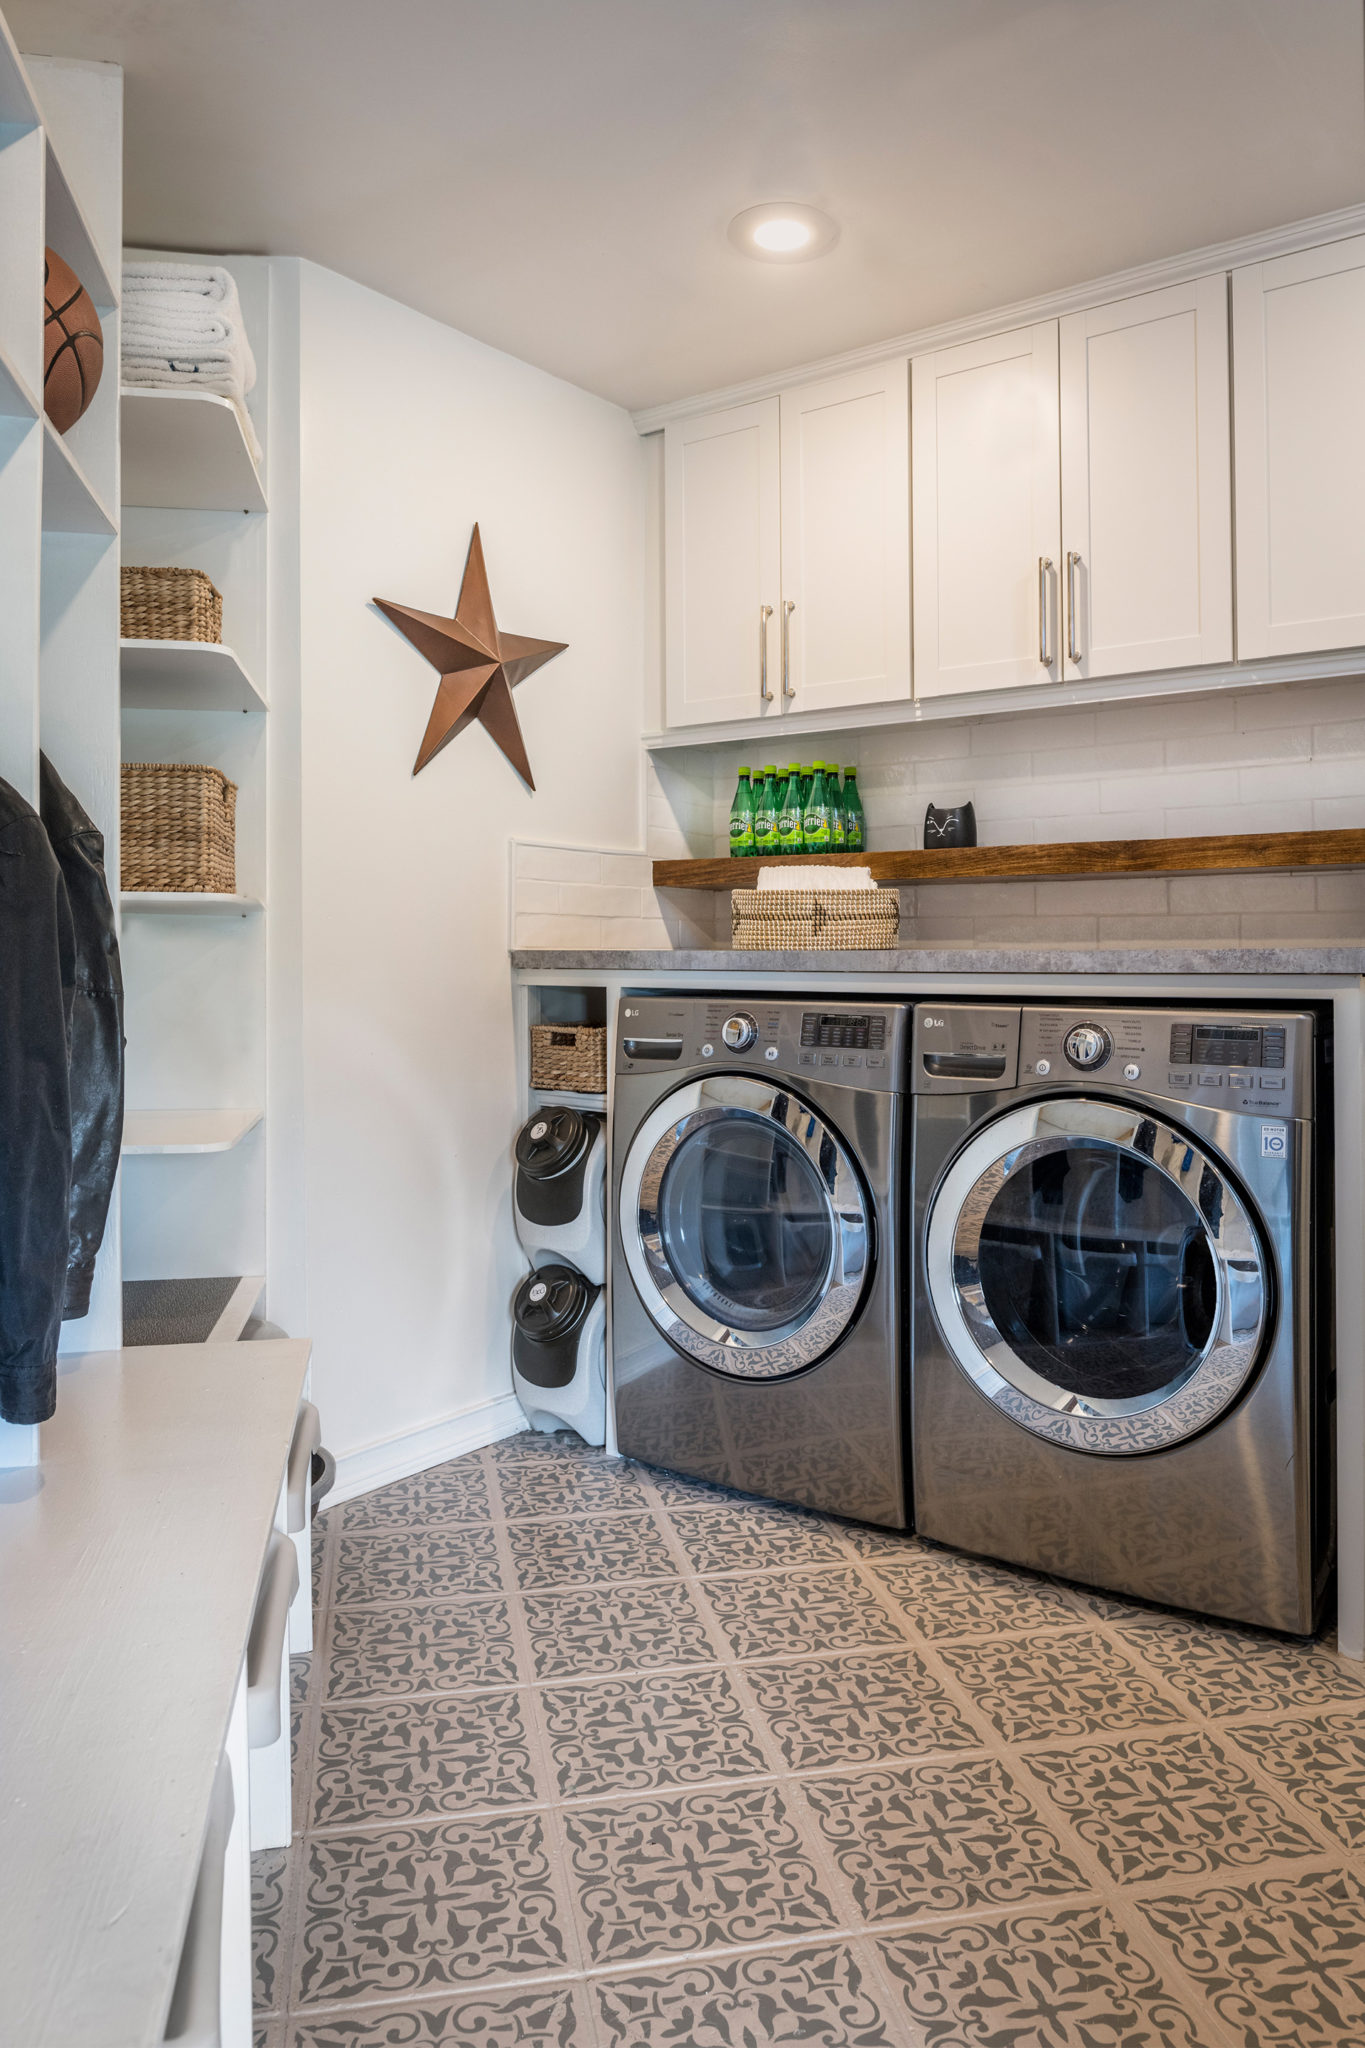 Organizing and Spring Cleaning the Laundry Room - Happy Brown House